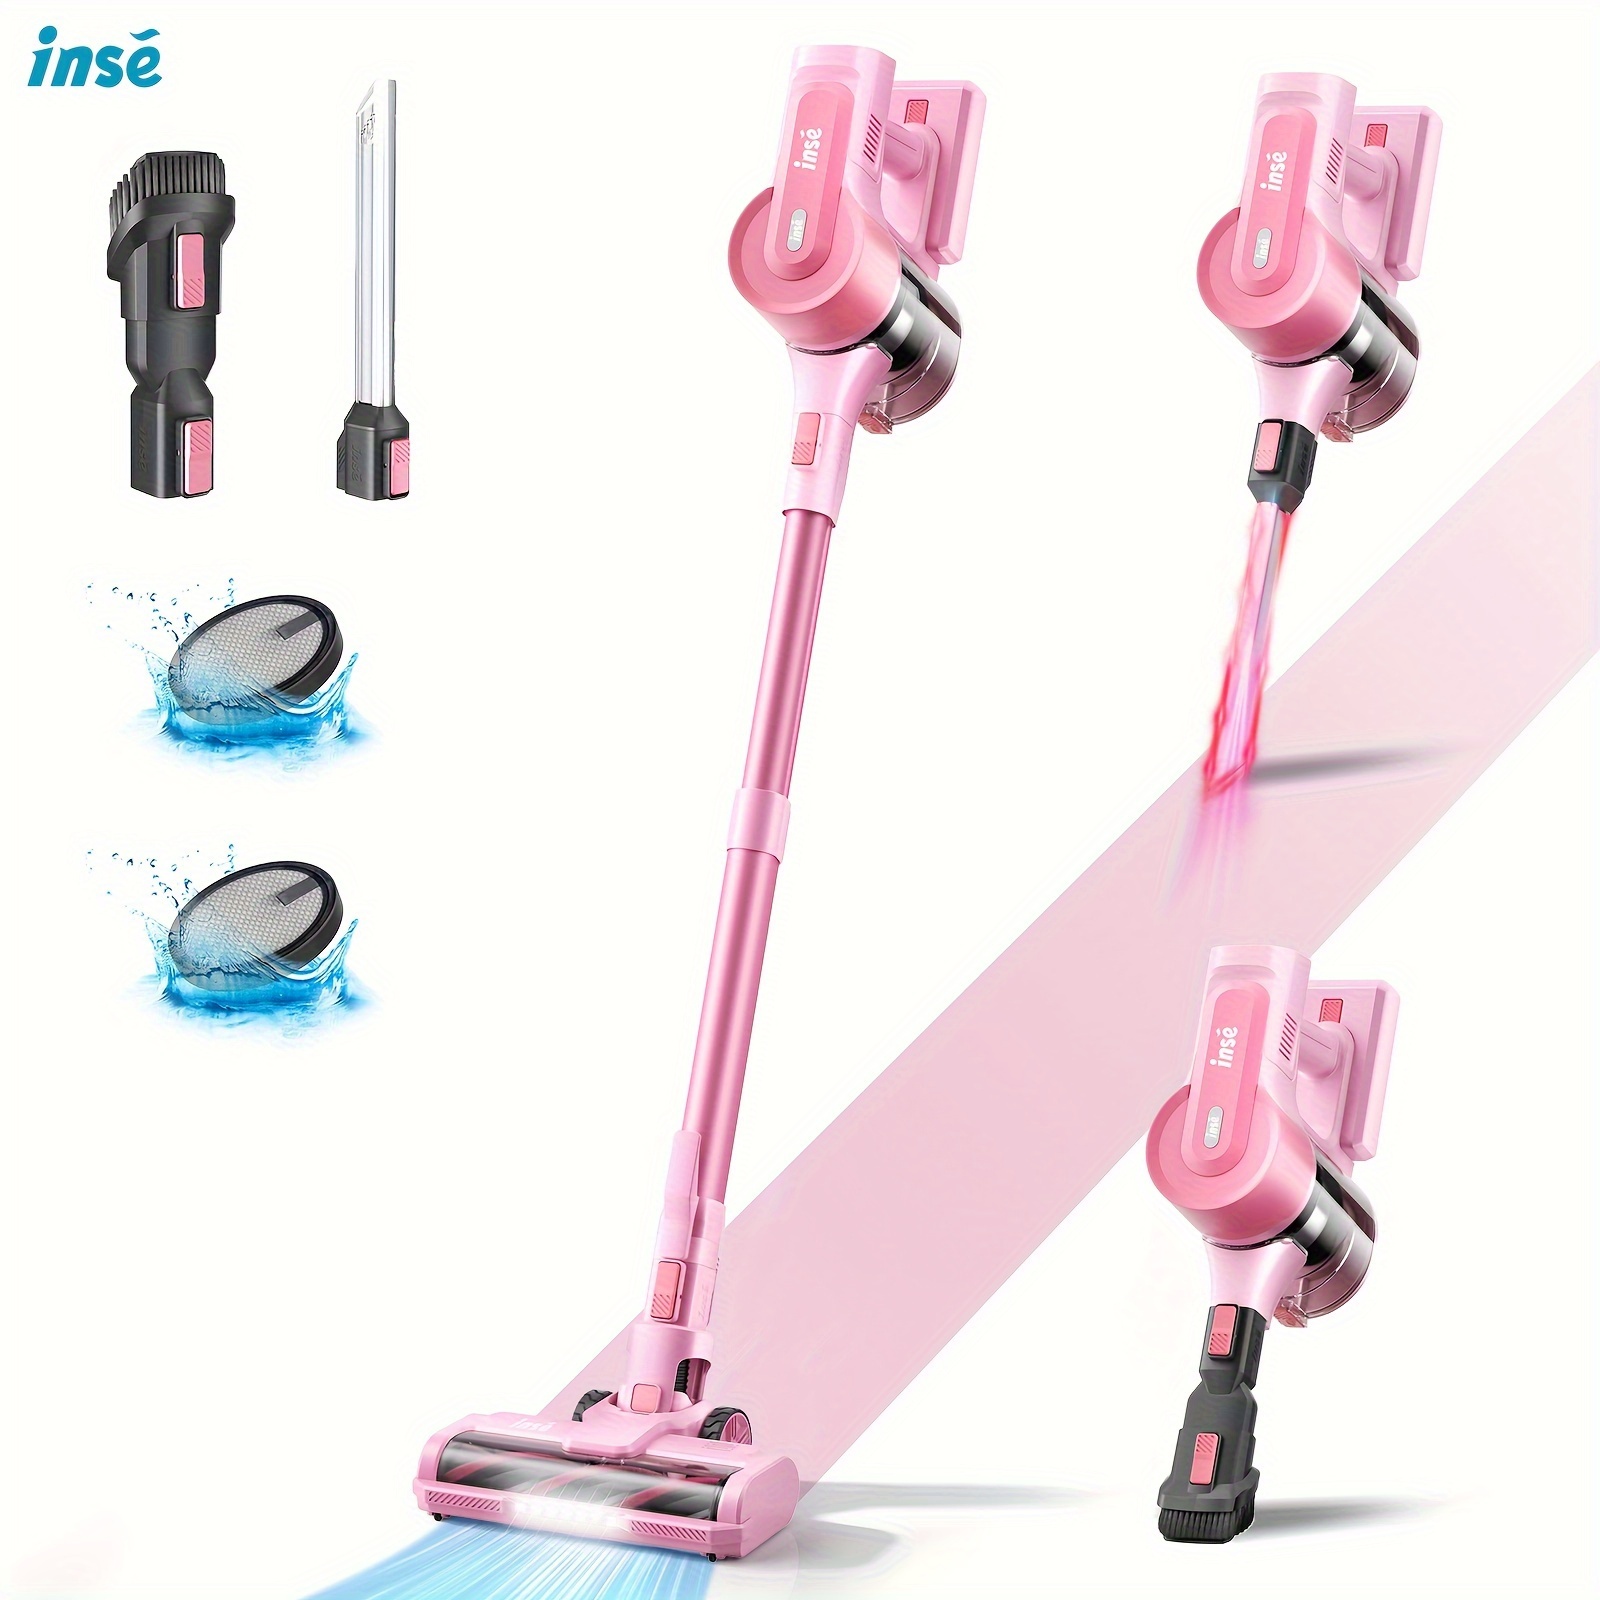 

Cordless Vacuum Cleaner, 30kpa/350w Powerful Stick Vacuum, Up To 50 Mins Runtime Rechargeable Battery, 6 In 1 Lightweight Vacuum Cleaners For Home Hardfloor Carpet Pet Hair